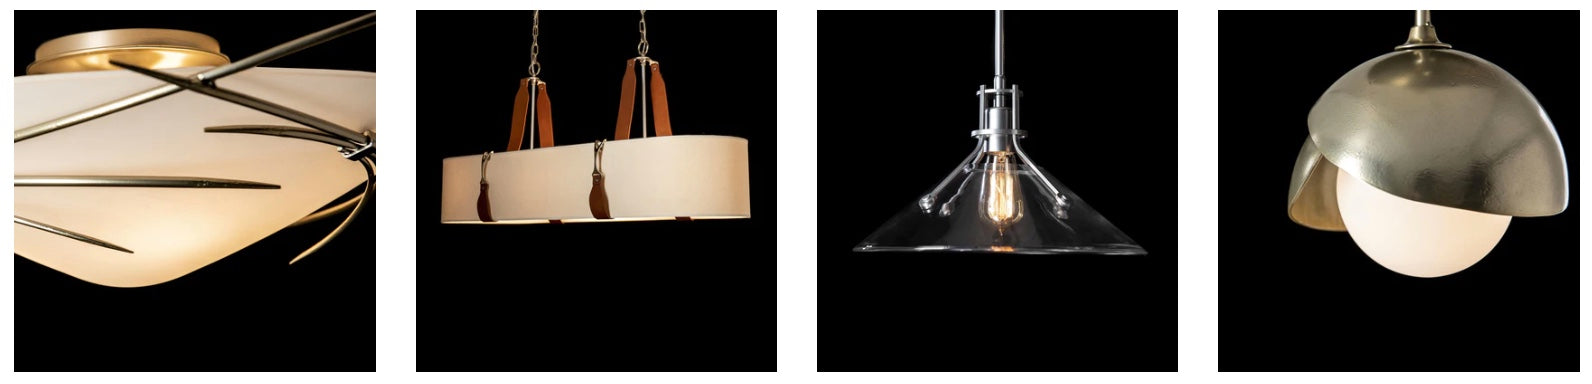 Our Products - Ceiling Fixtures